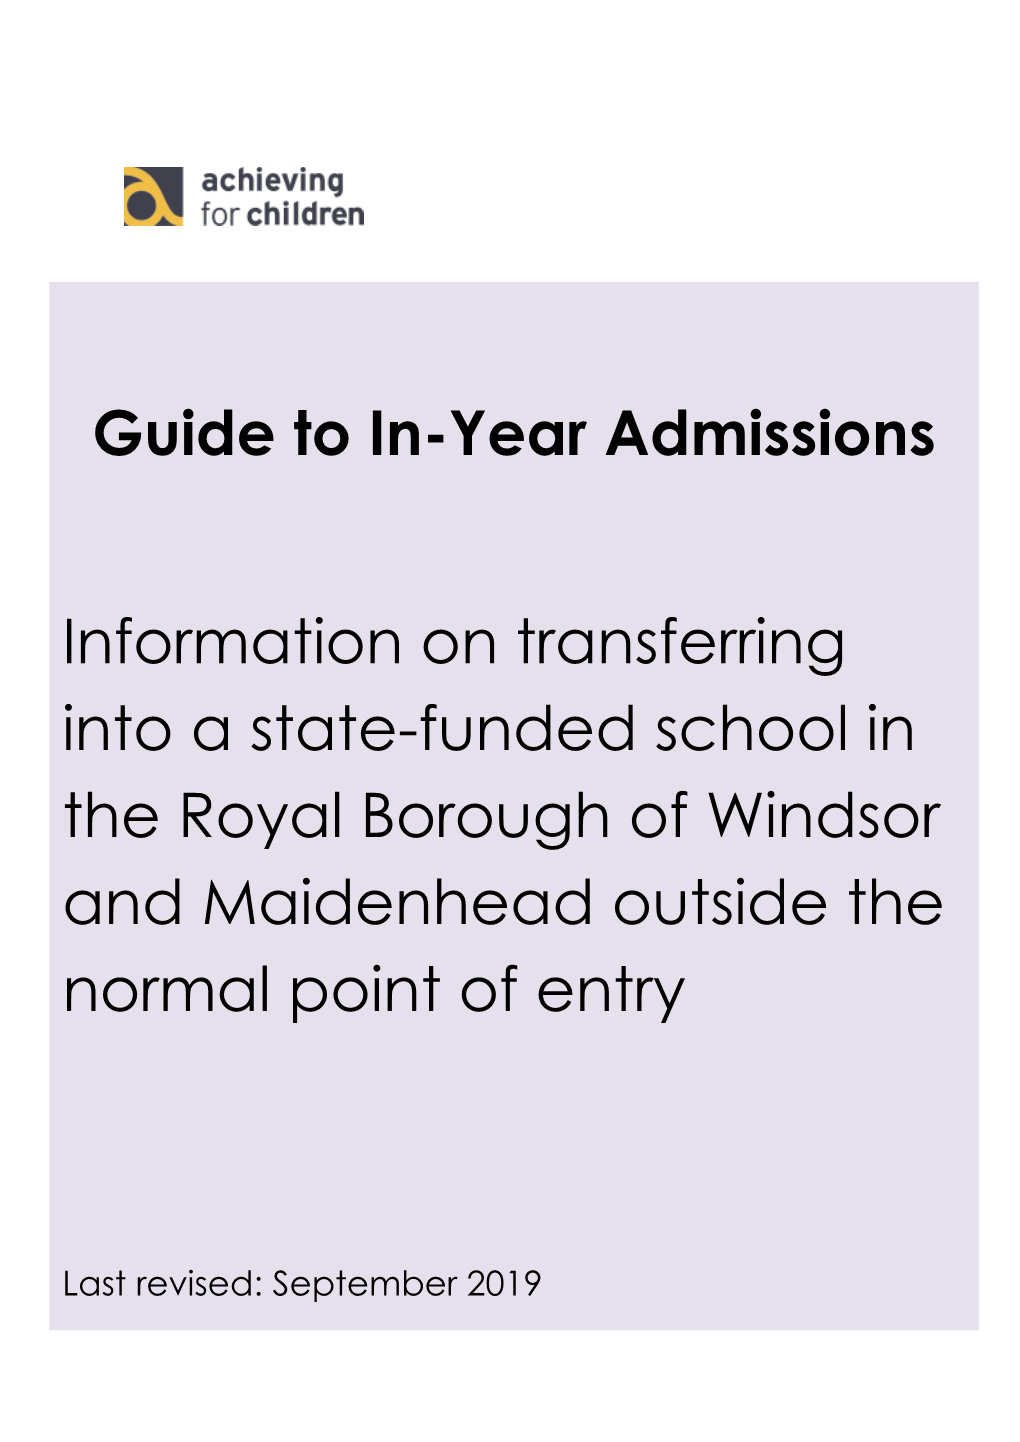 Guide to In-Year Admissions Information on Transferring Into A